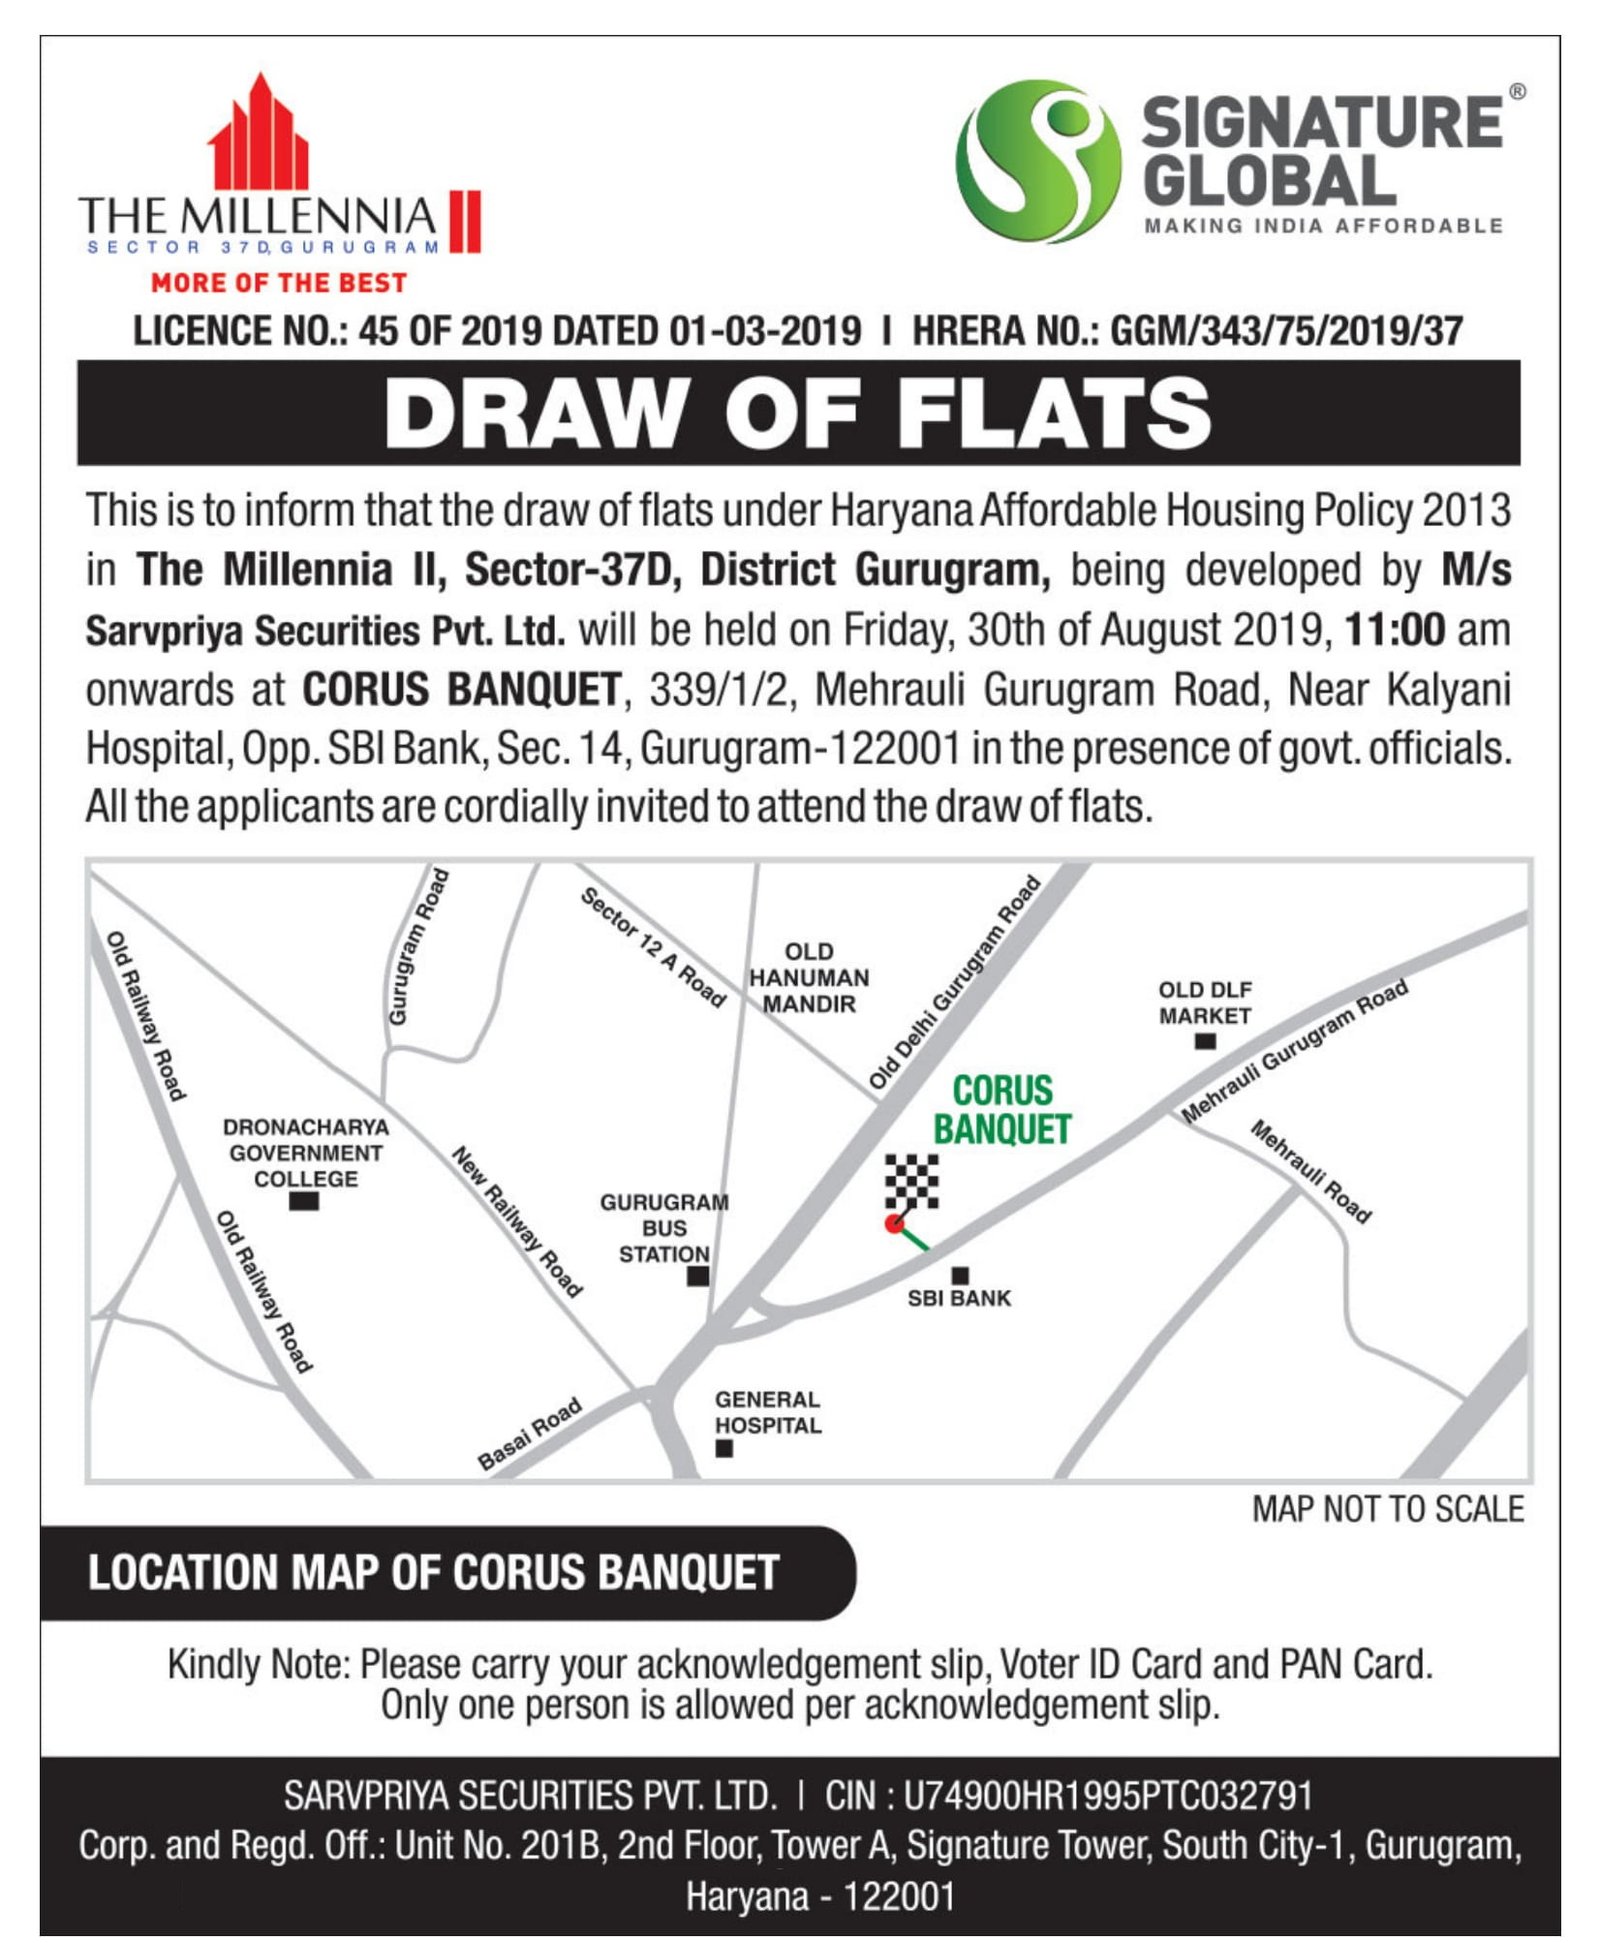 Signature Global The Millennia 2 Sector 37D Gurgaon Draw Date 30th August 2019